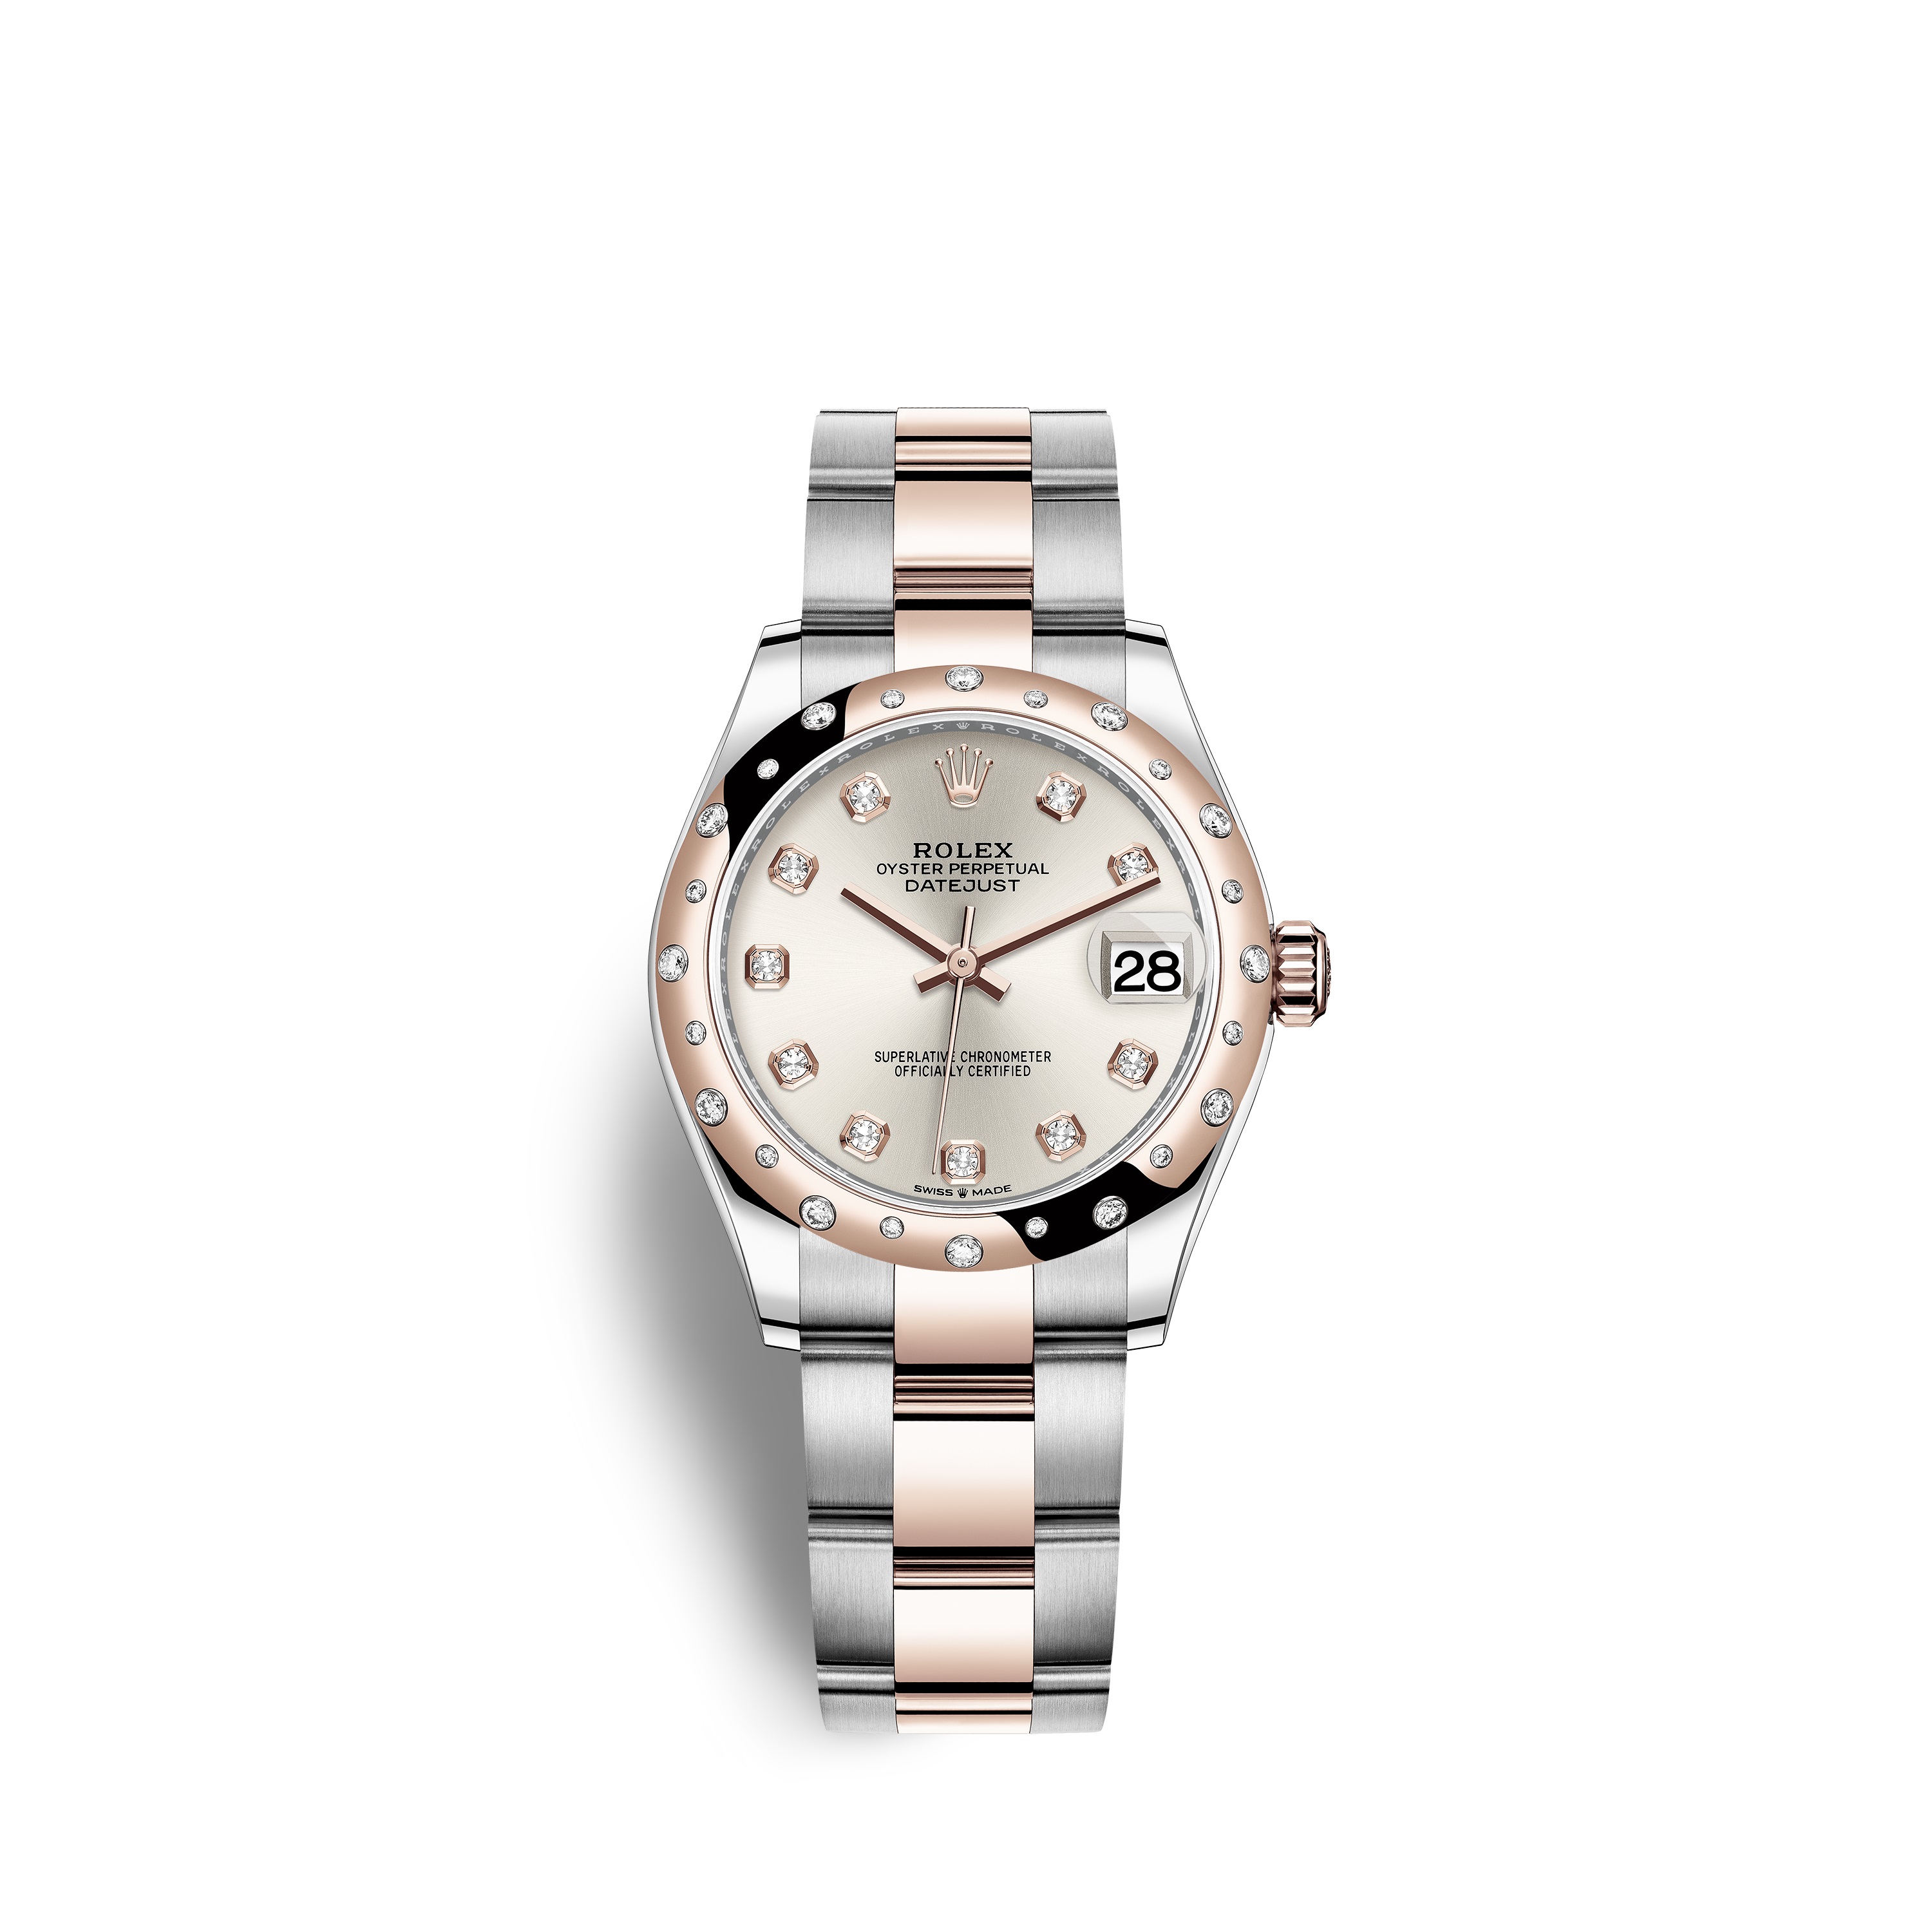 Datejust 31 278341RBR Rose Gold, Stainless Steel & Diamonds Watch (Silver Set with Diamonds)